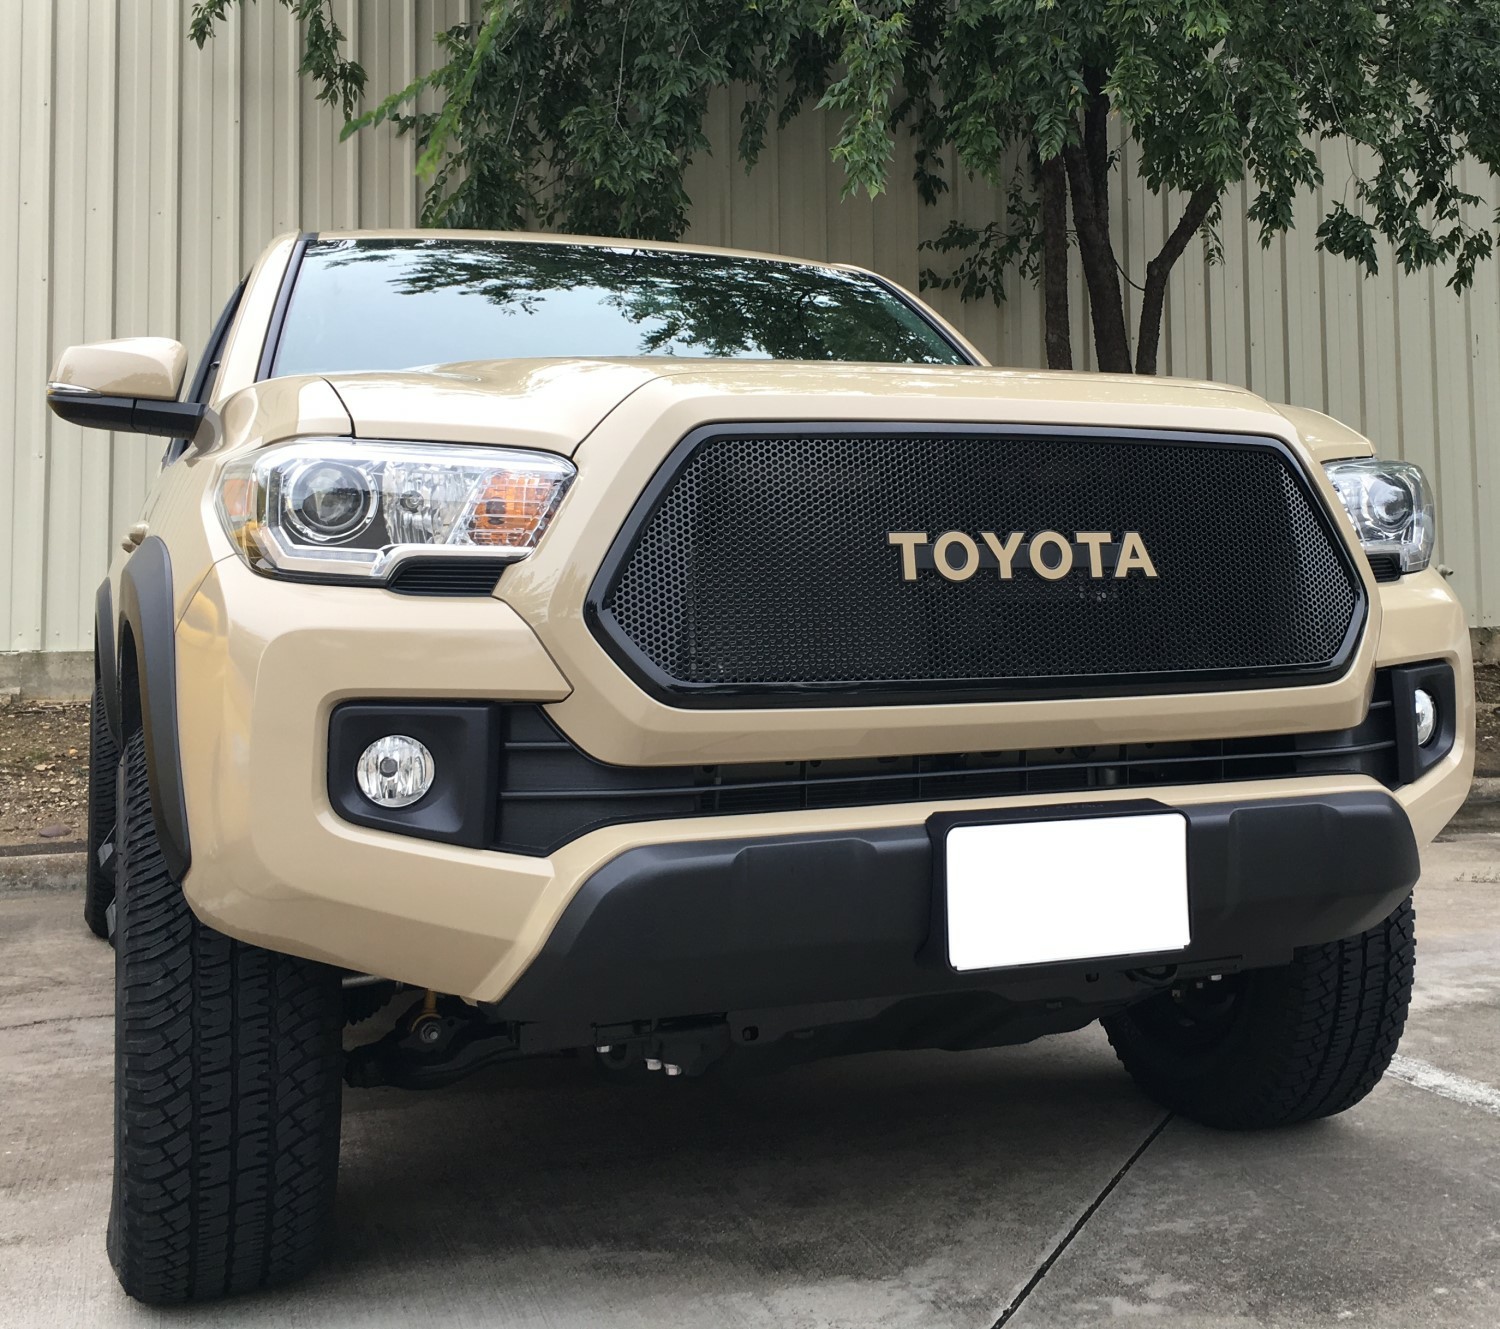 Personalized Touch: Custom Grille for 3rd Gen Toyota Tacoma with Color Matched Emblem